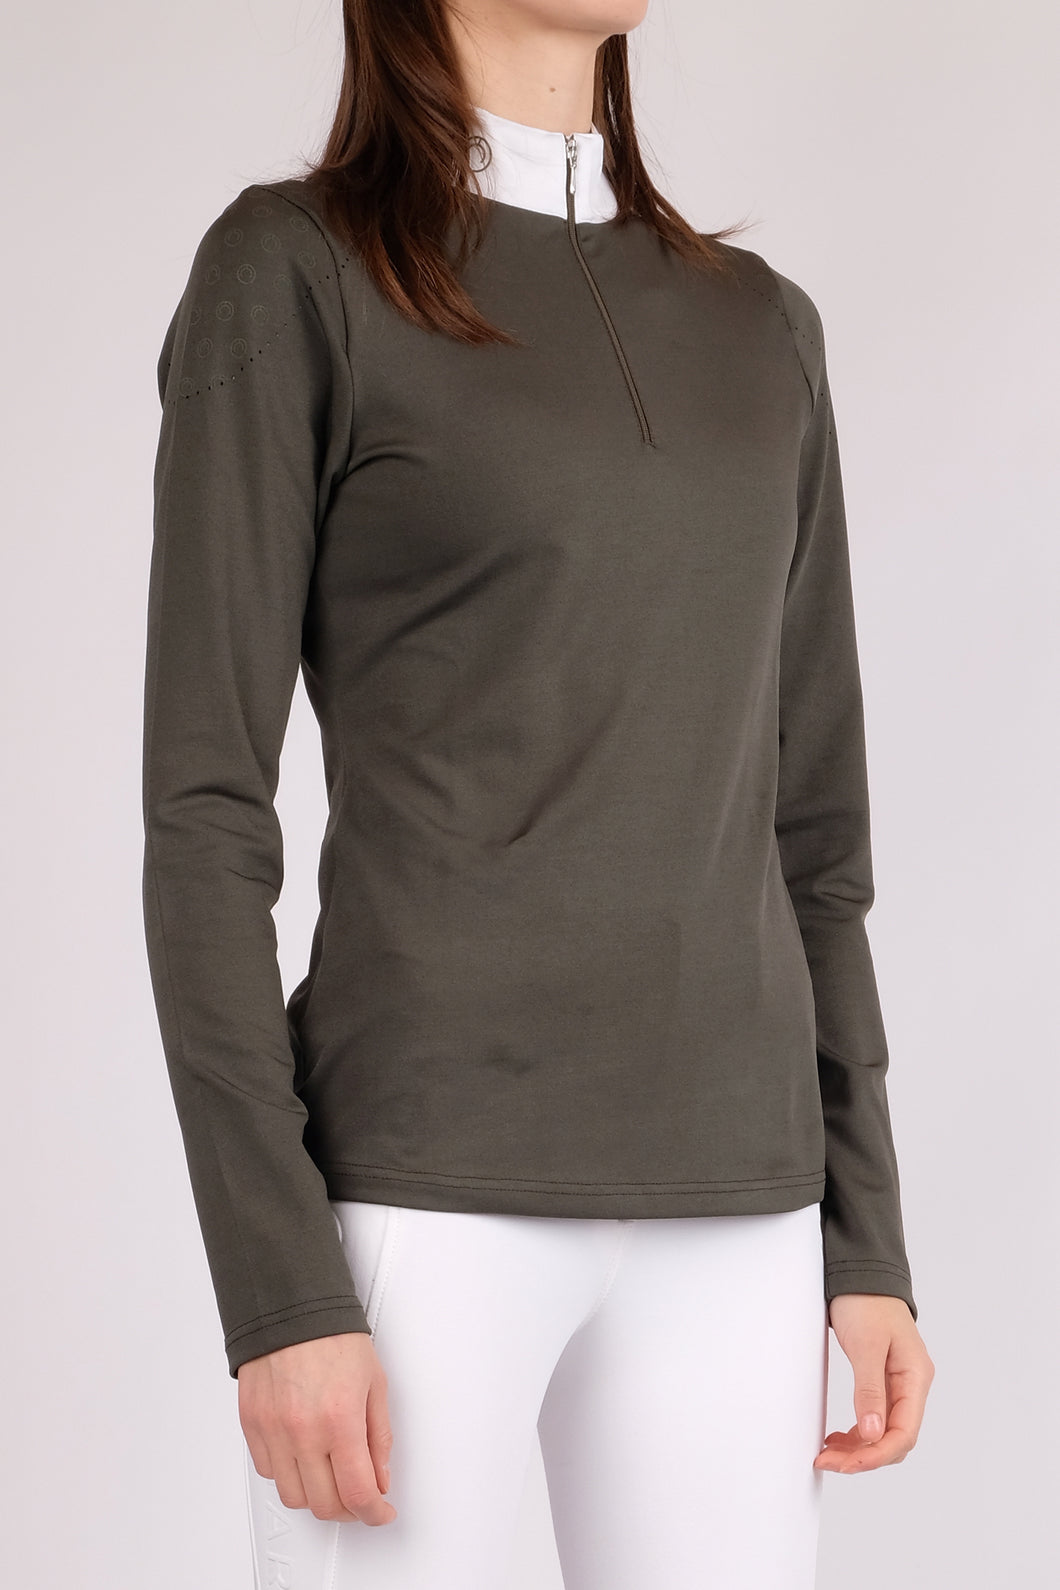 Rosy Longsleeve Competition Shirt - Olive